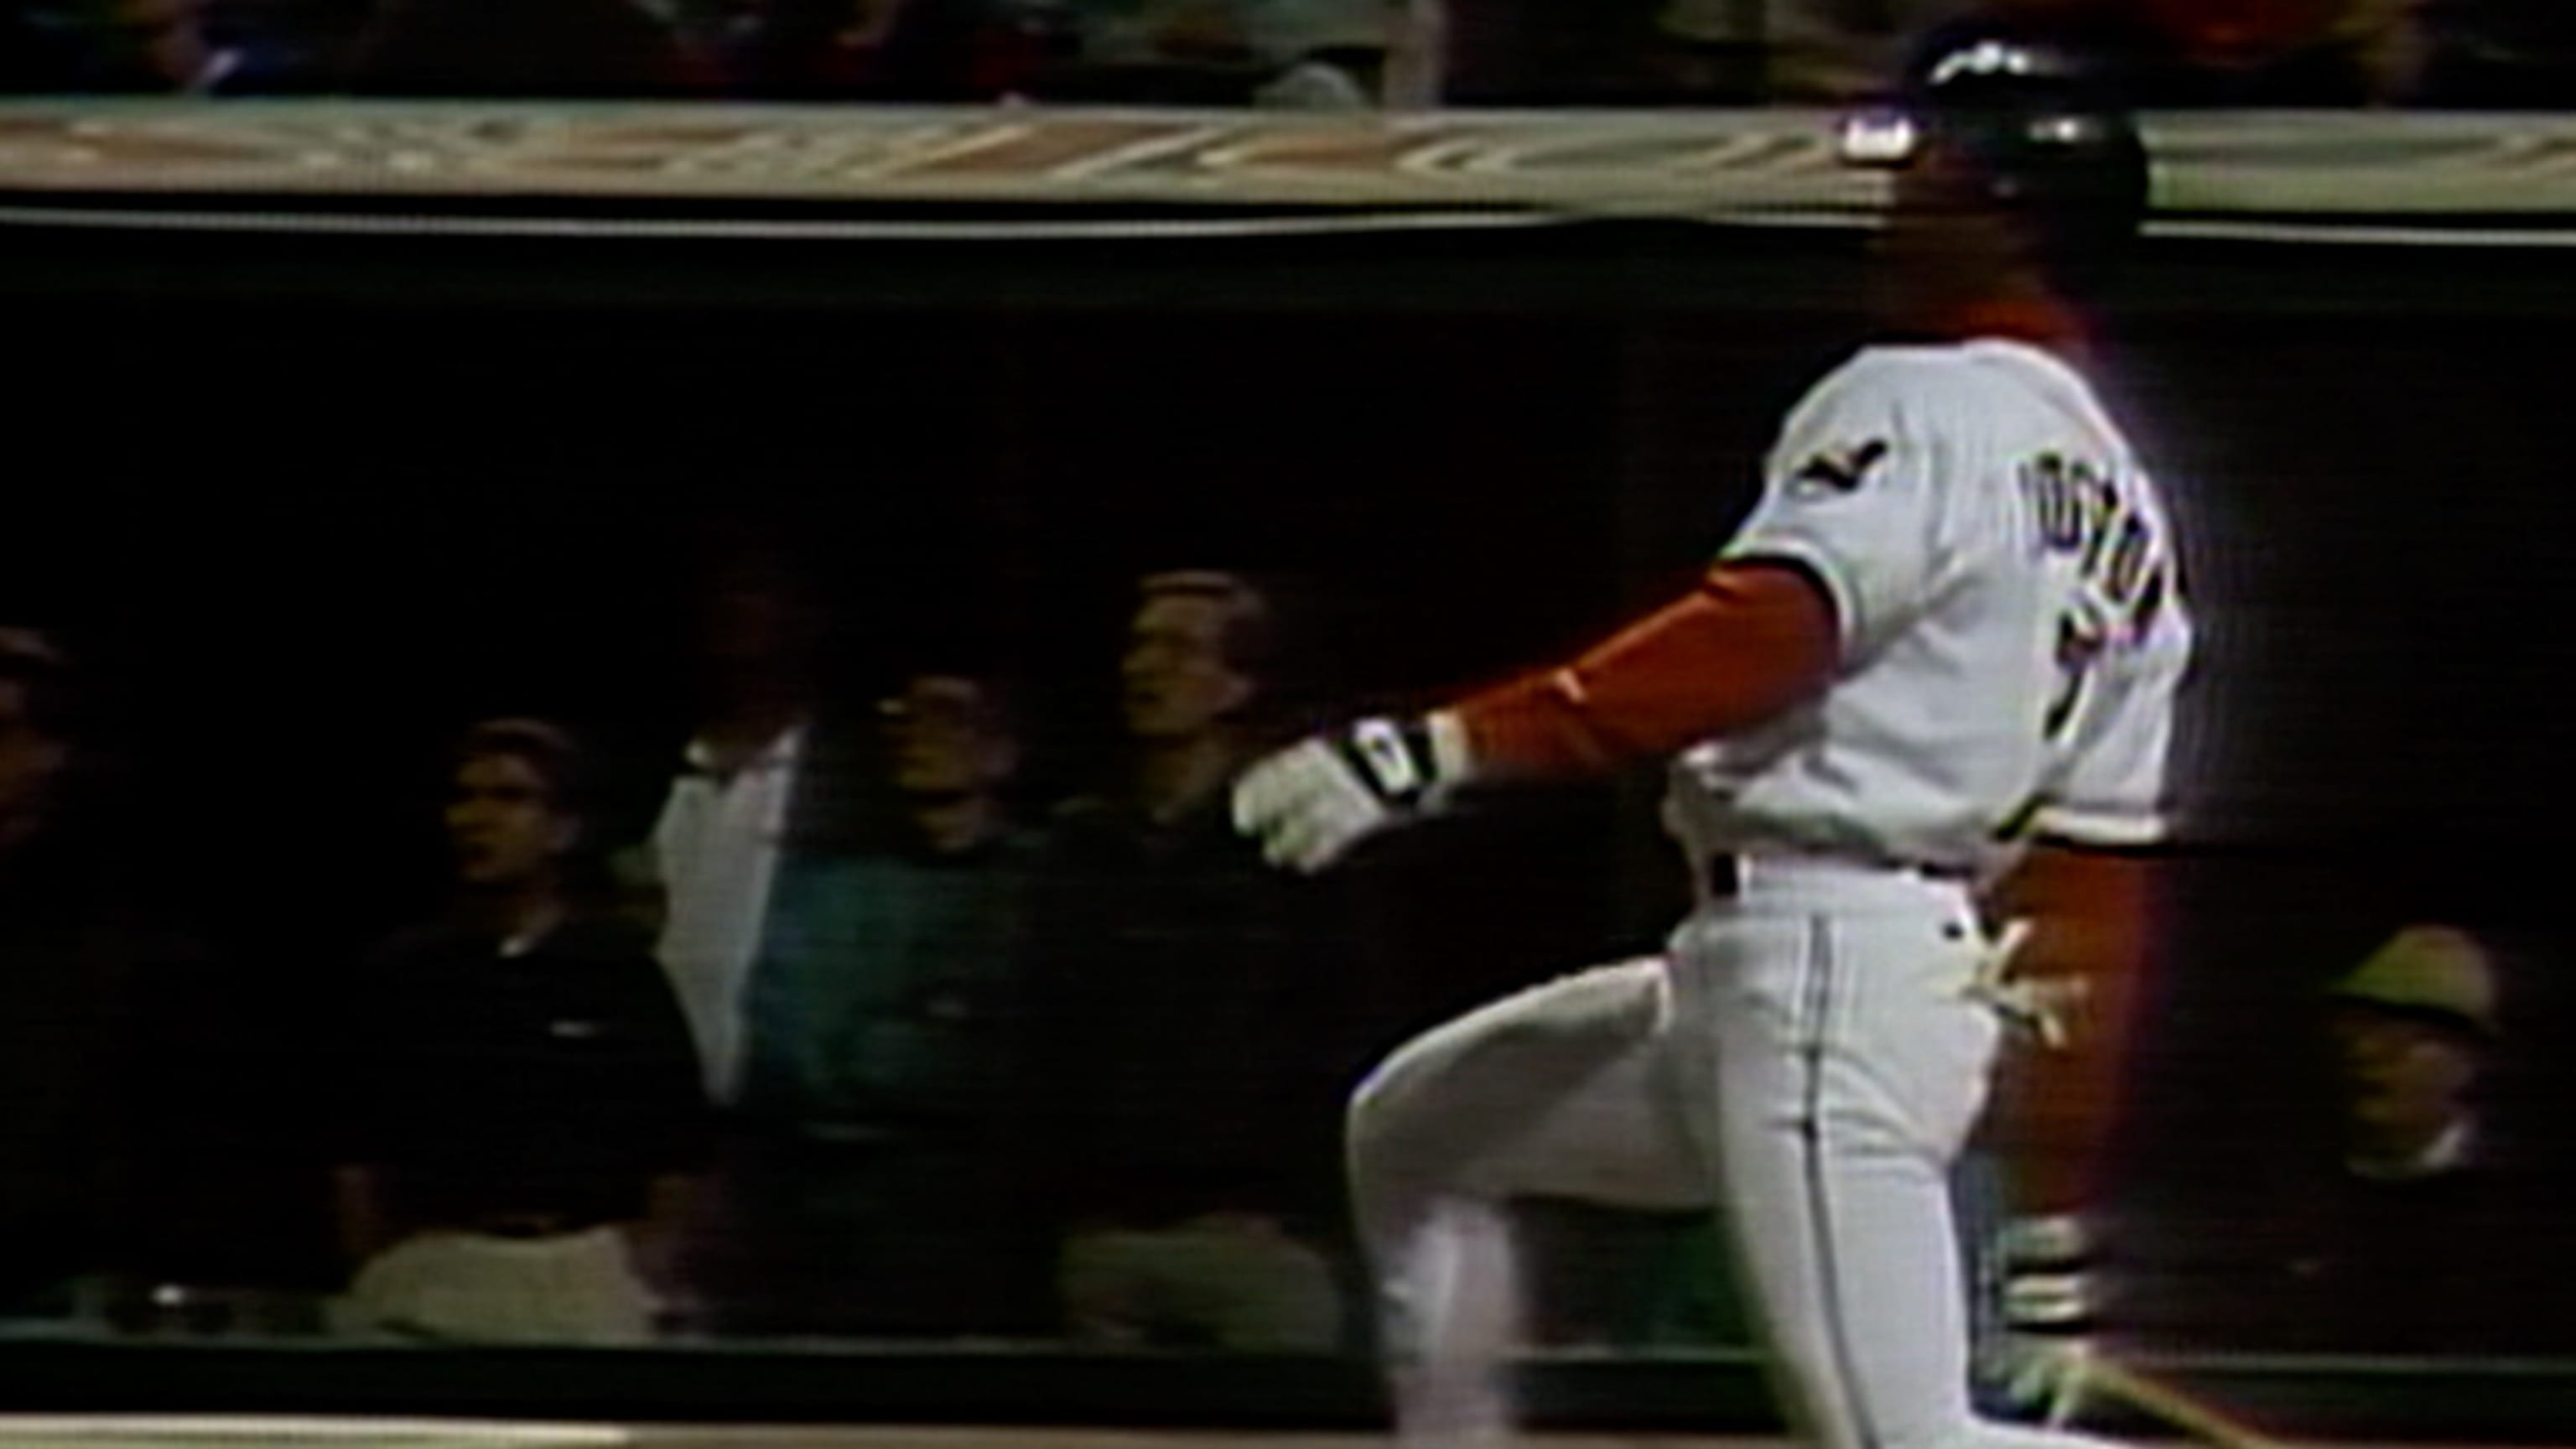 Kenny Lofton's catch: A step-by-step look at the athletic feat 